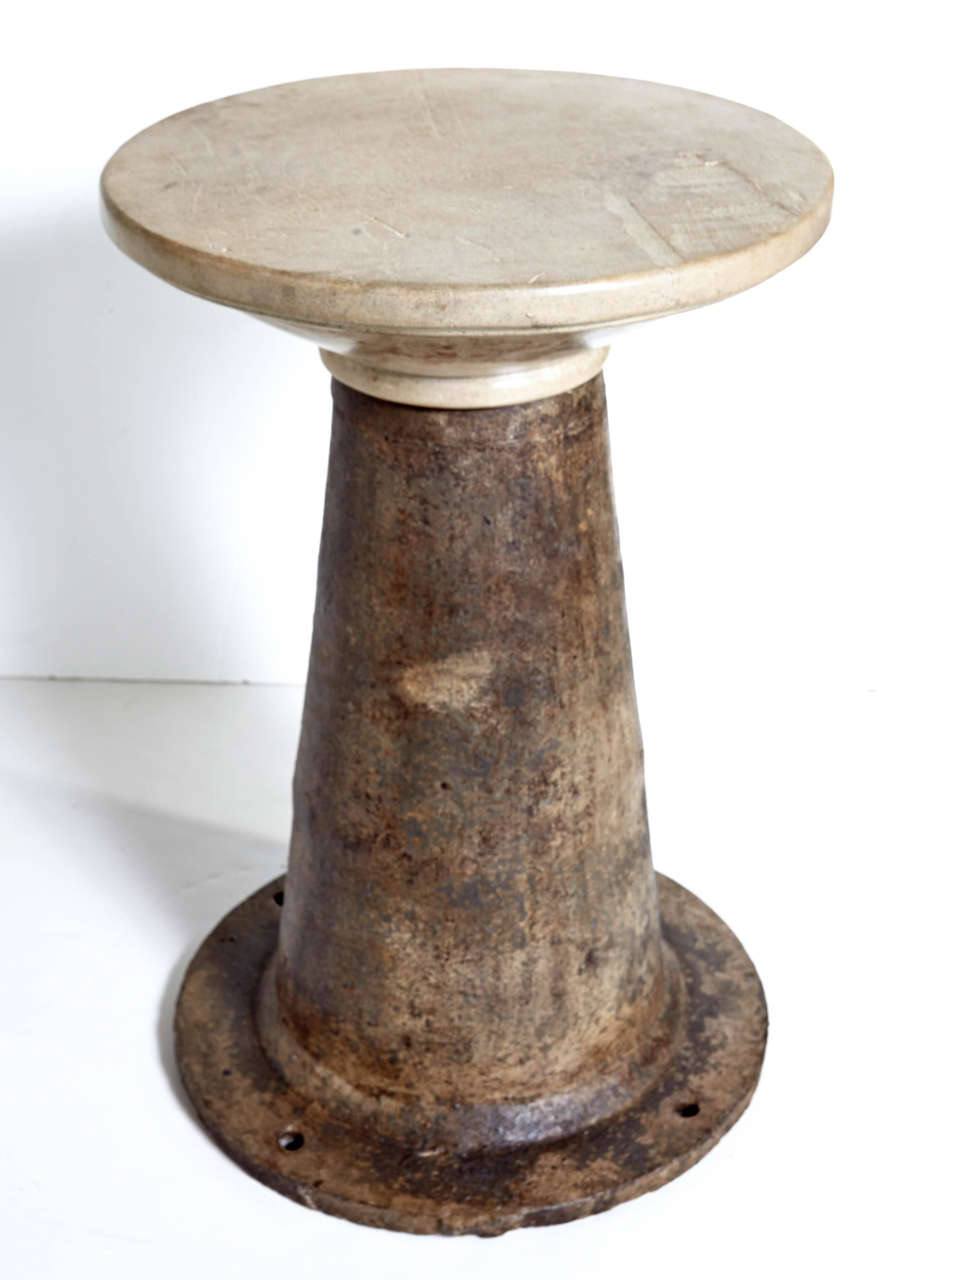 Vintage Industrial machine mount with limestone top as side table.